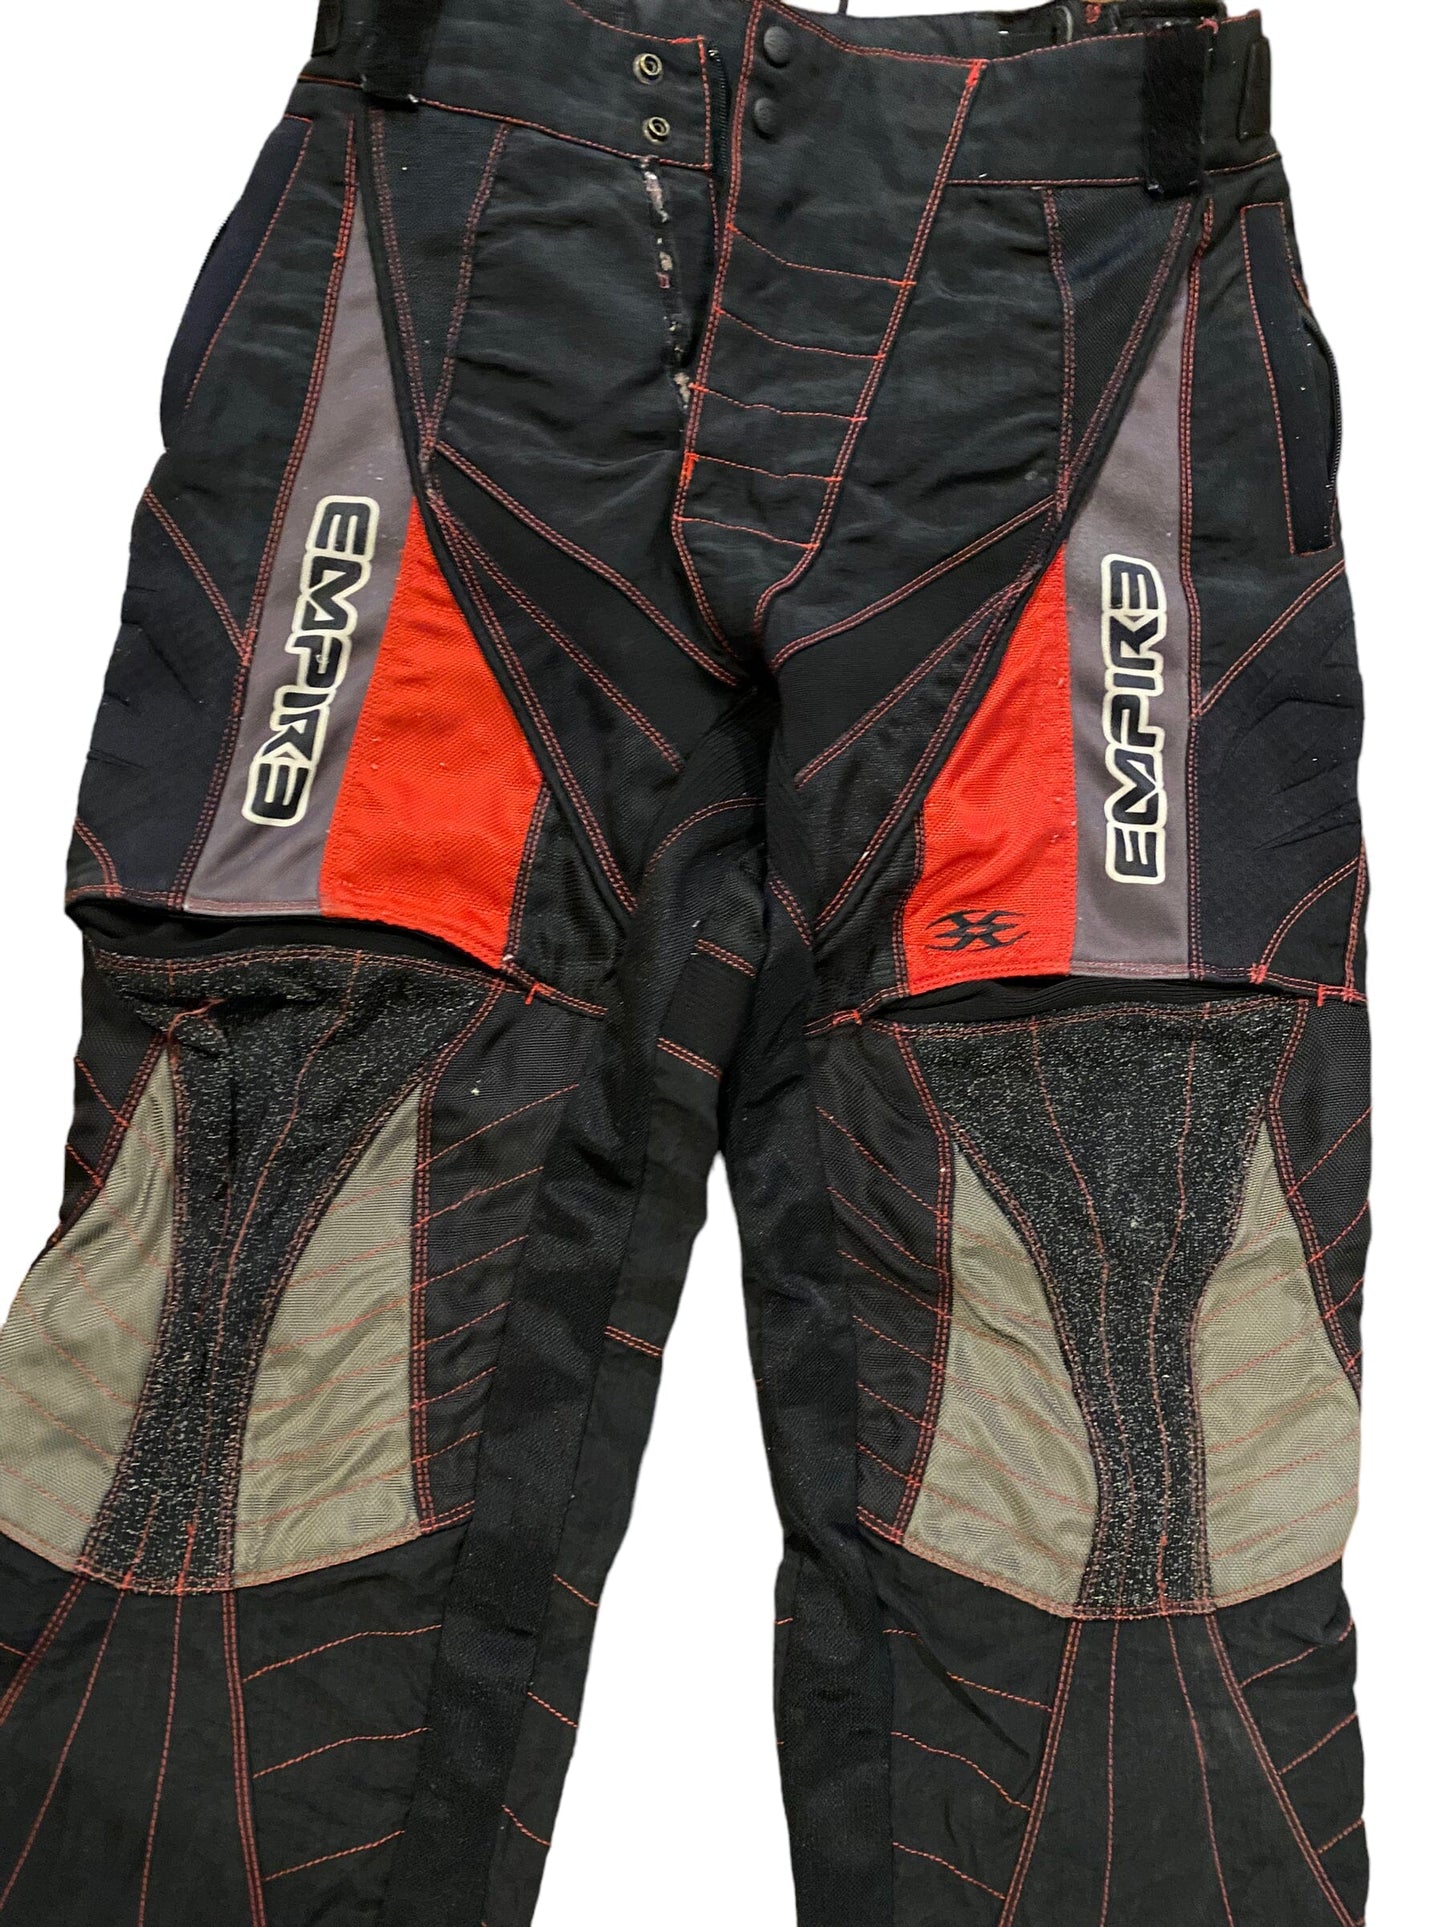 Used Empire Paintball Pants Size Large(34-36) Paintball Gun from CPXBrosPaintball Buy/Sell/Trade Paintball Markers, New Paintball Guns, Paintball Hoppers, Paintball Masks, and Hormesis Headbands